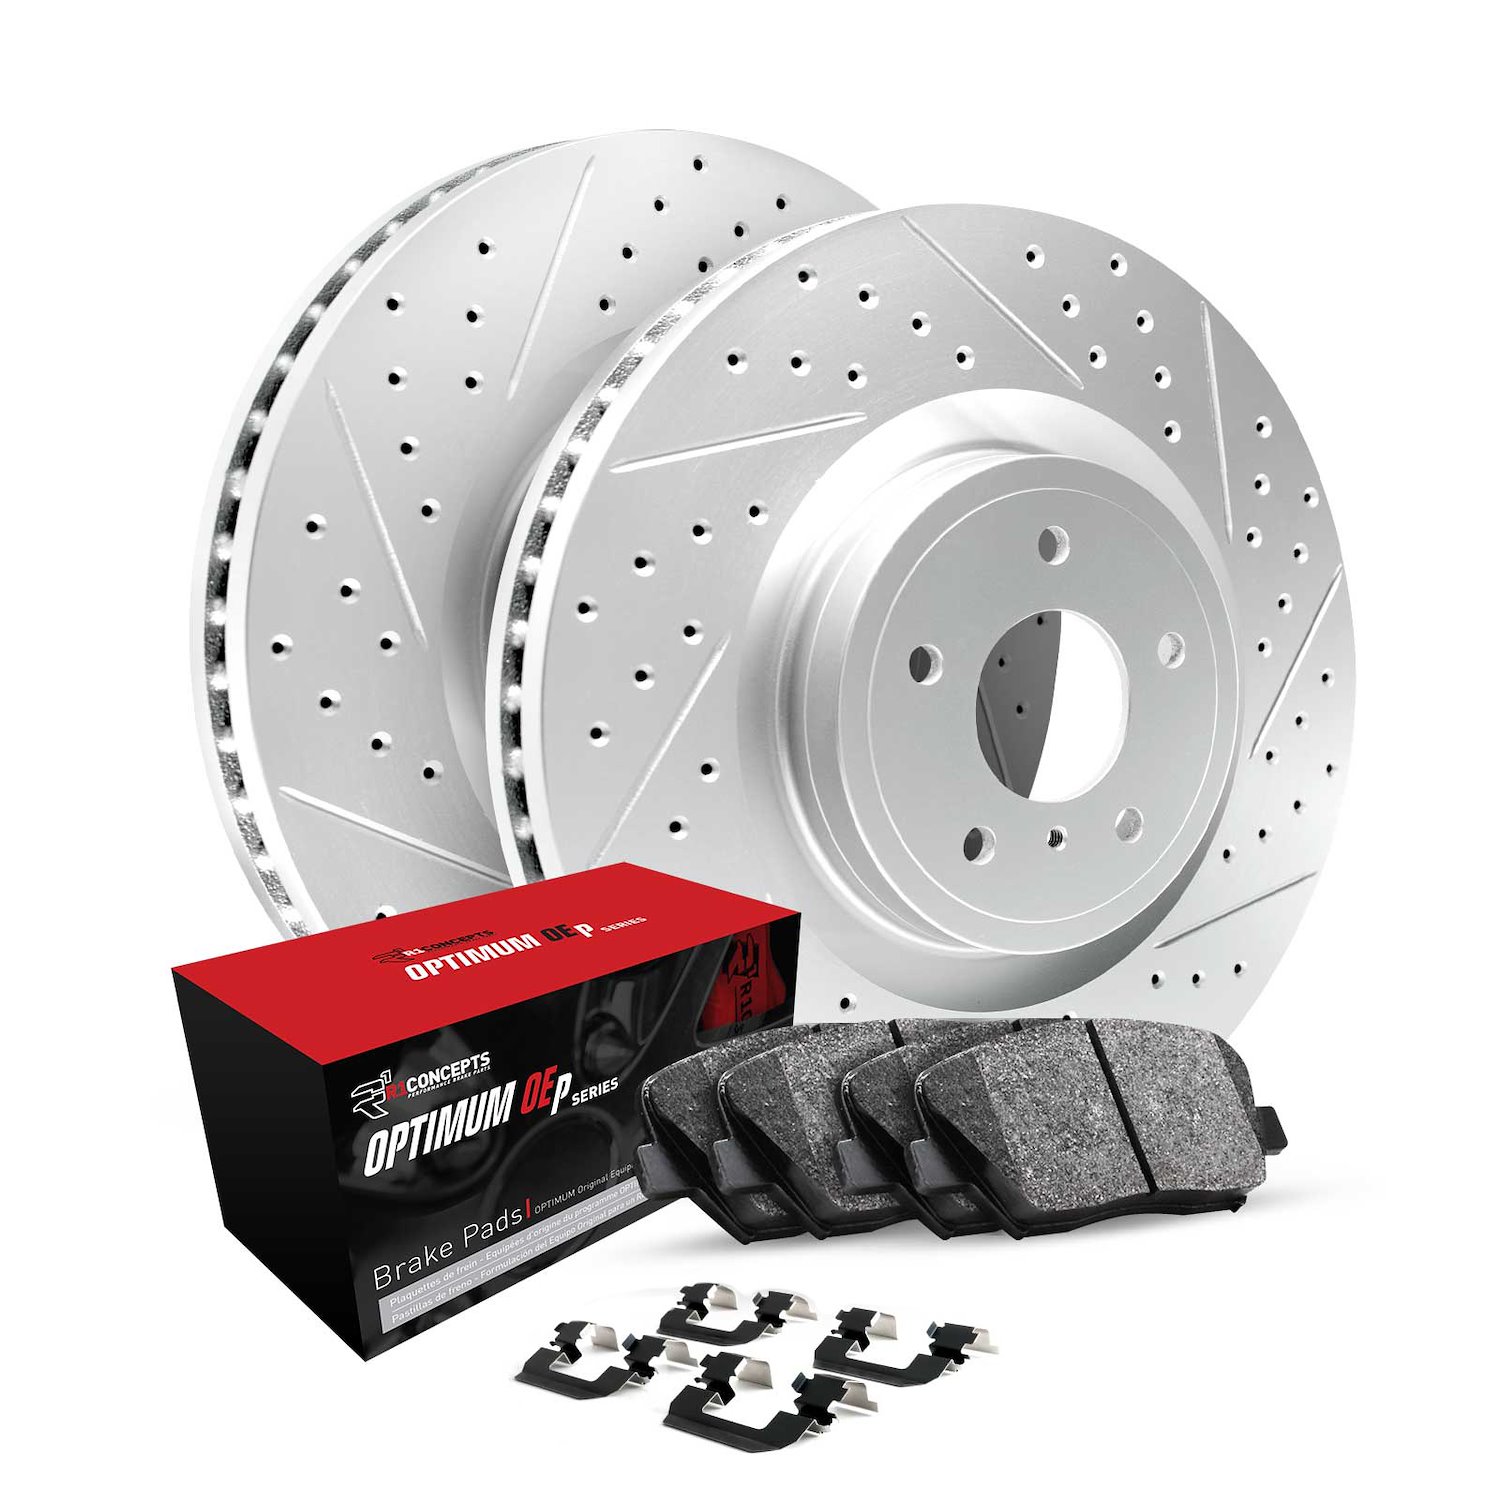 GEO-Carbon Drilled/Slotted Rotors w/Optimum OE Pads/Hardware, 1983-1989 Fits Multiple Makes/Models, Position: Front